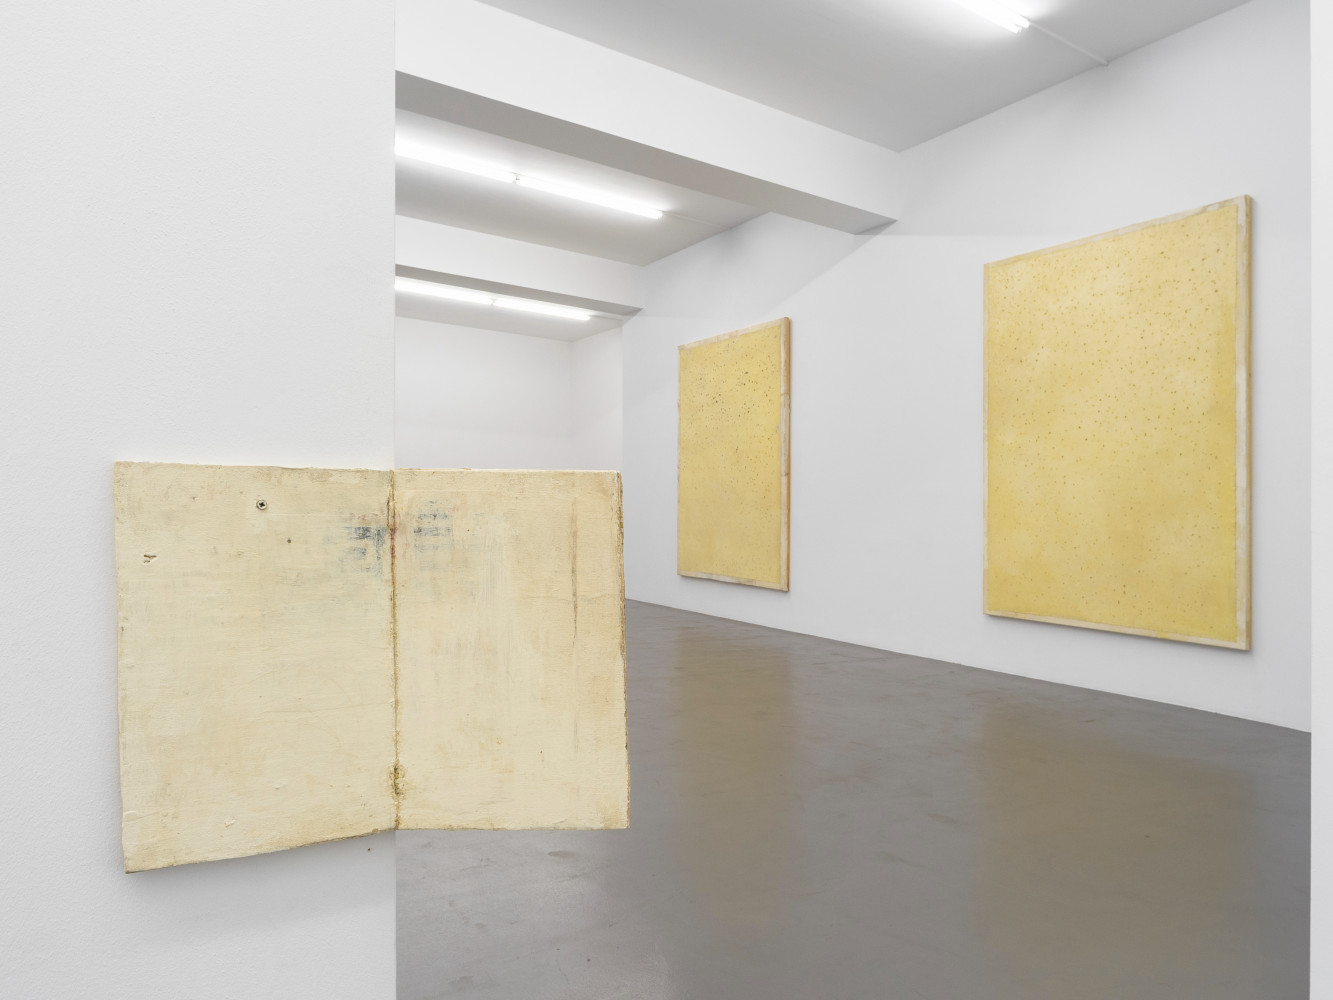 Lawrence Carroll, ‘A Tribute to Lawrence Carroll’, Installation view, Buchmann Galerie, 2019